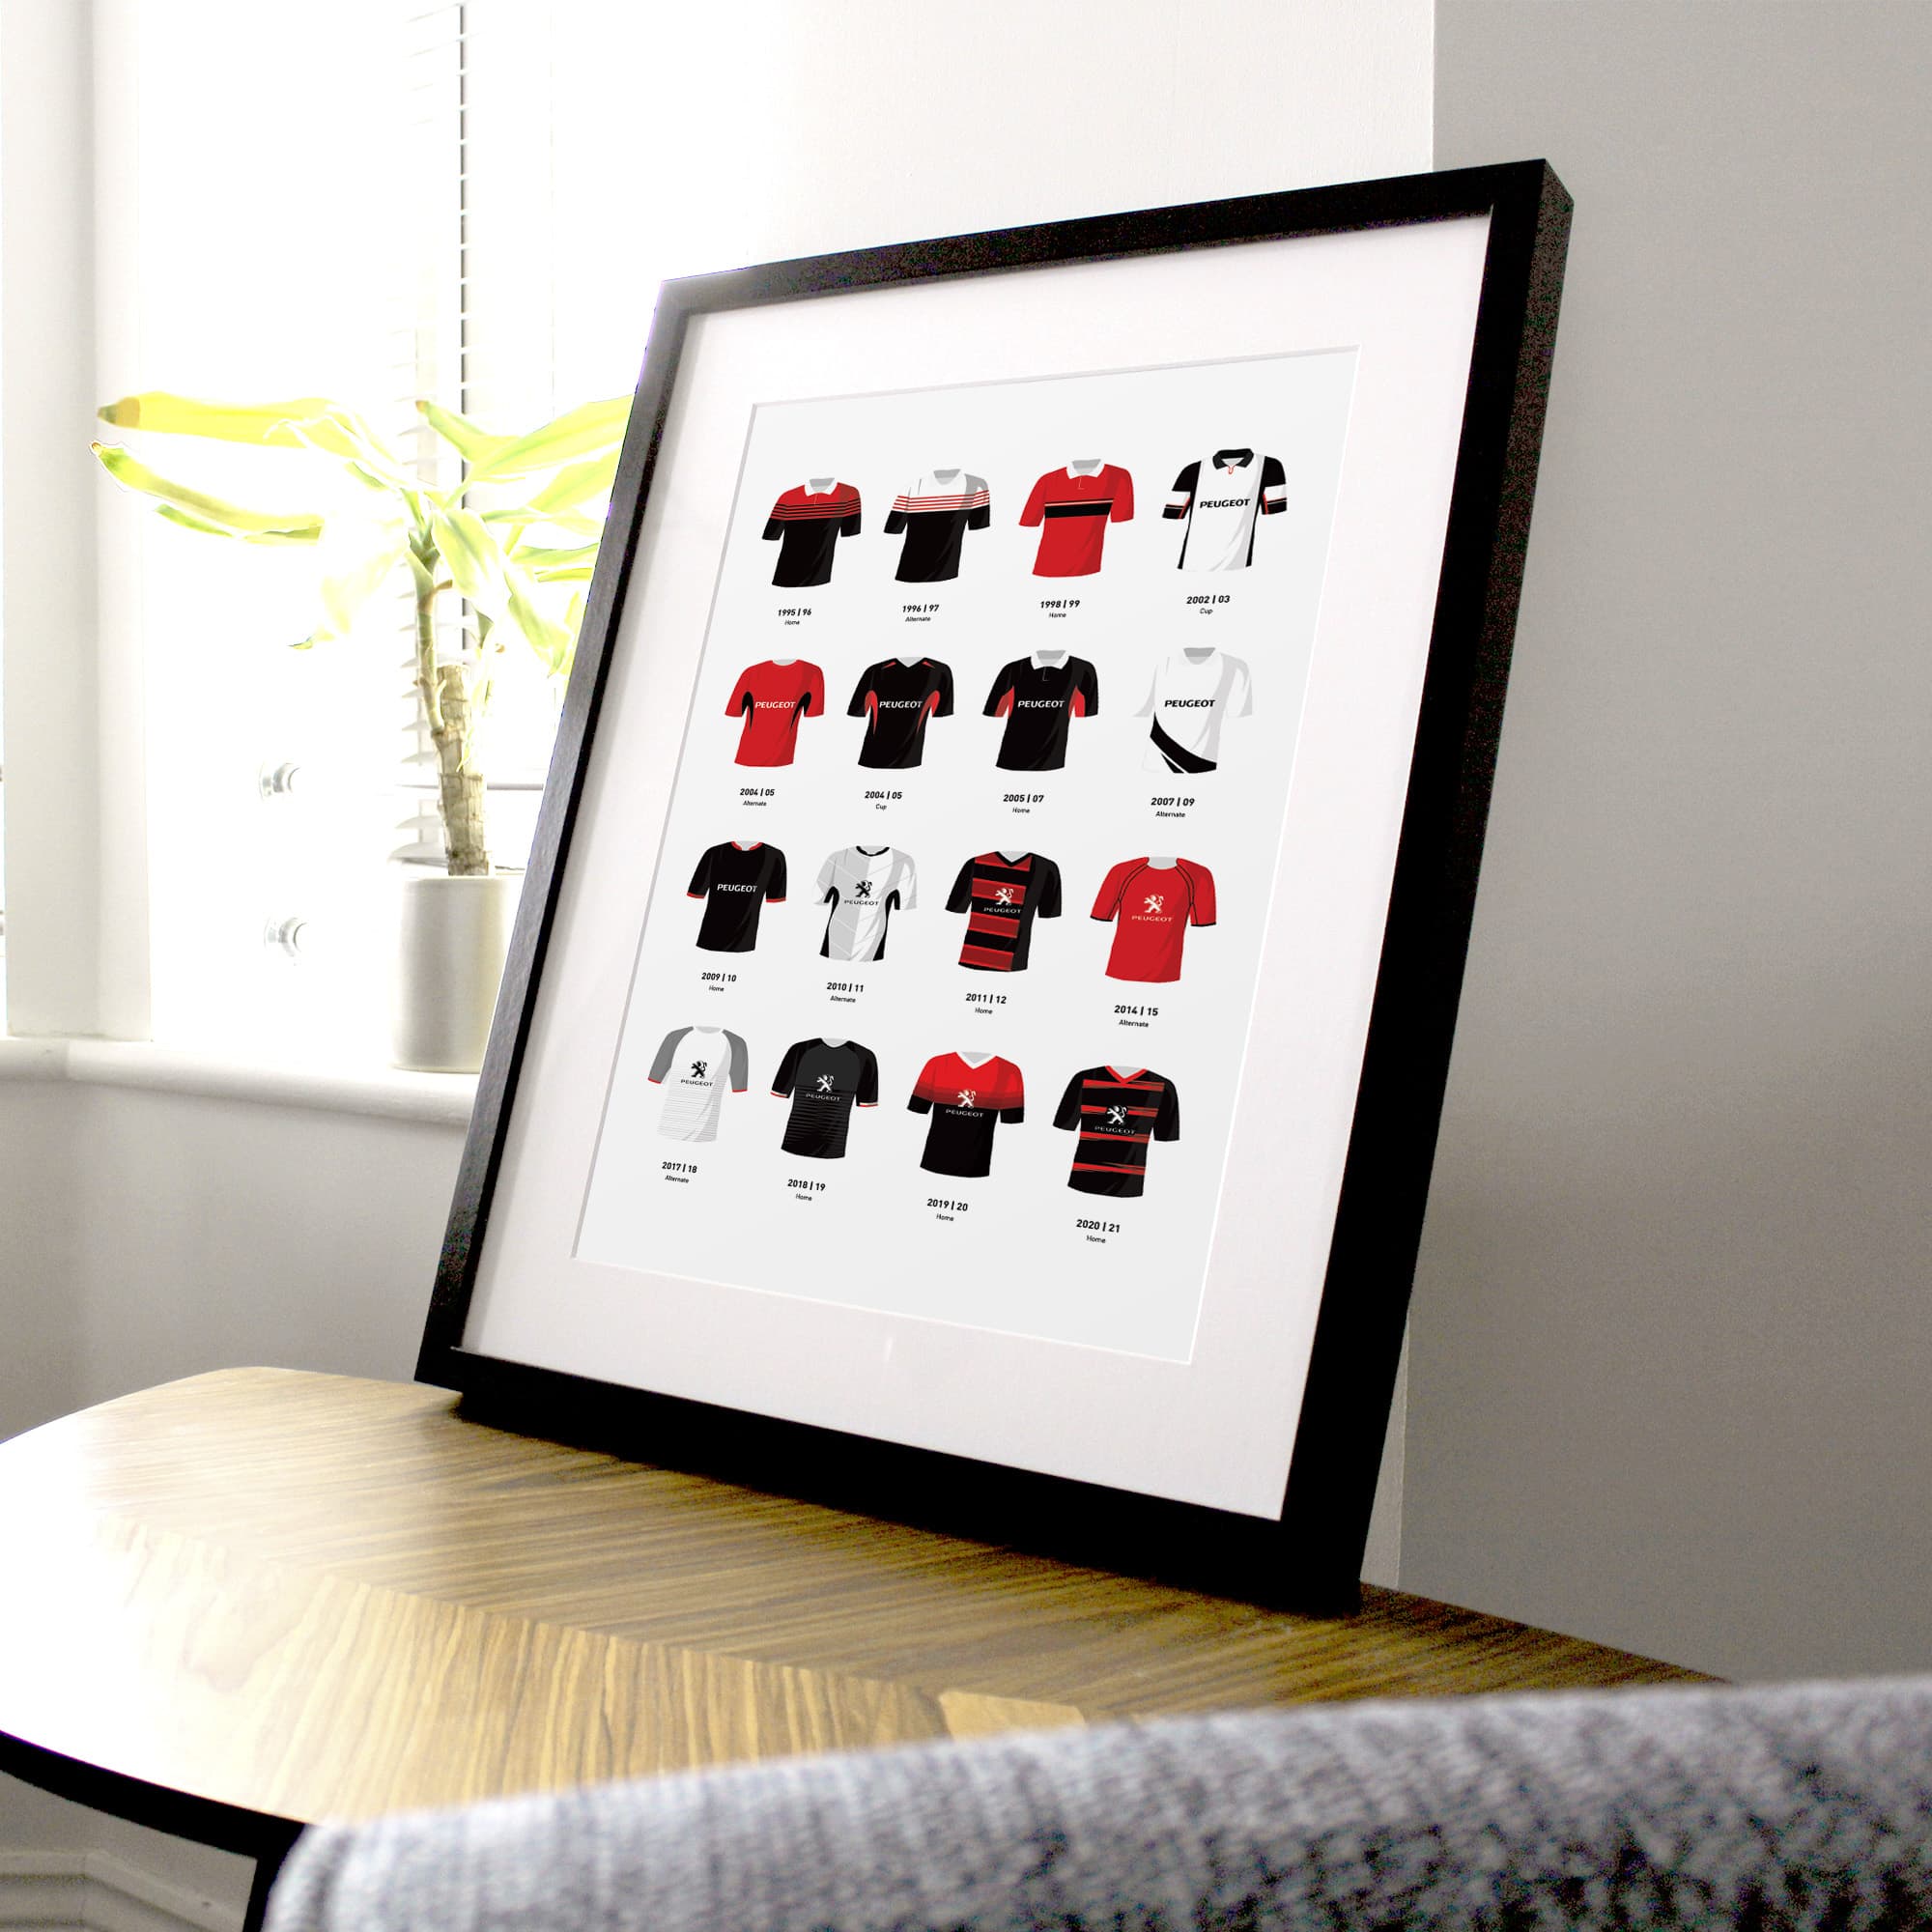 Toulouse Classic Kits Rugby Union Team Print